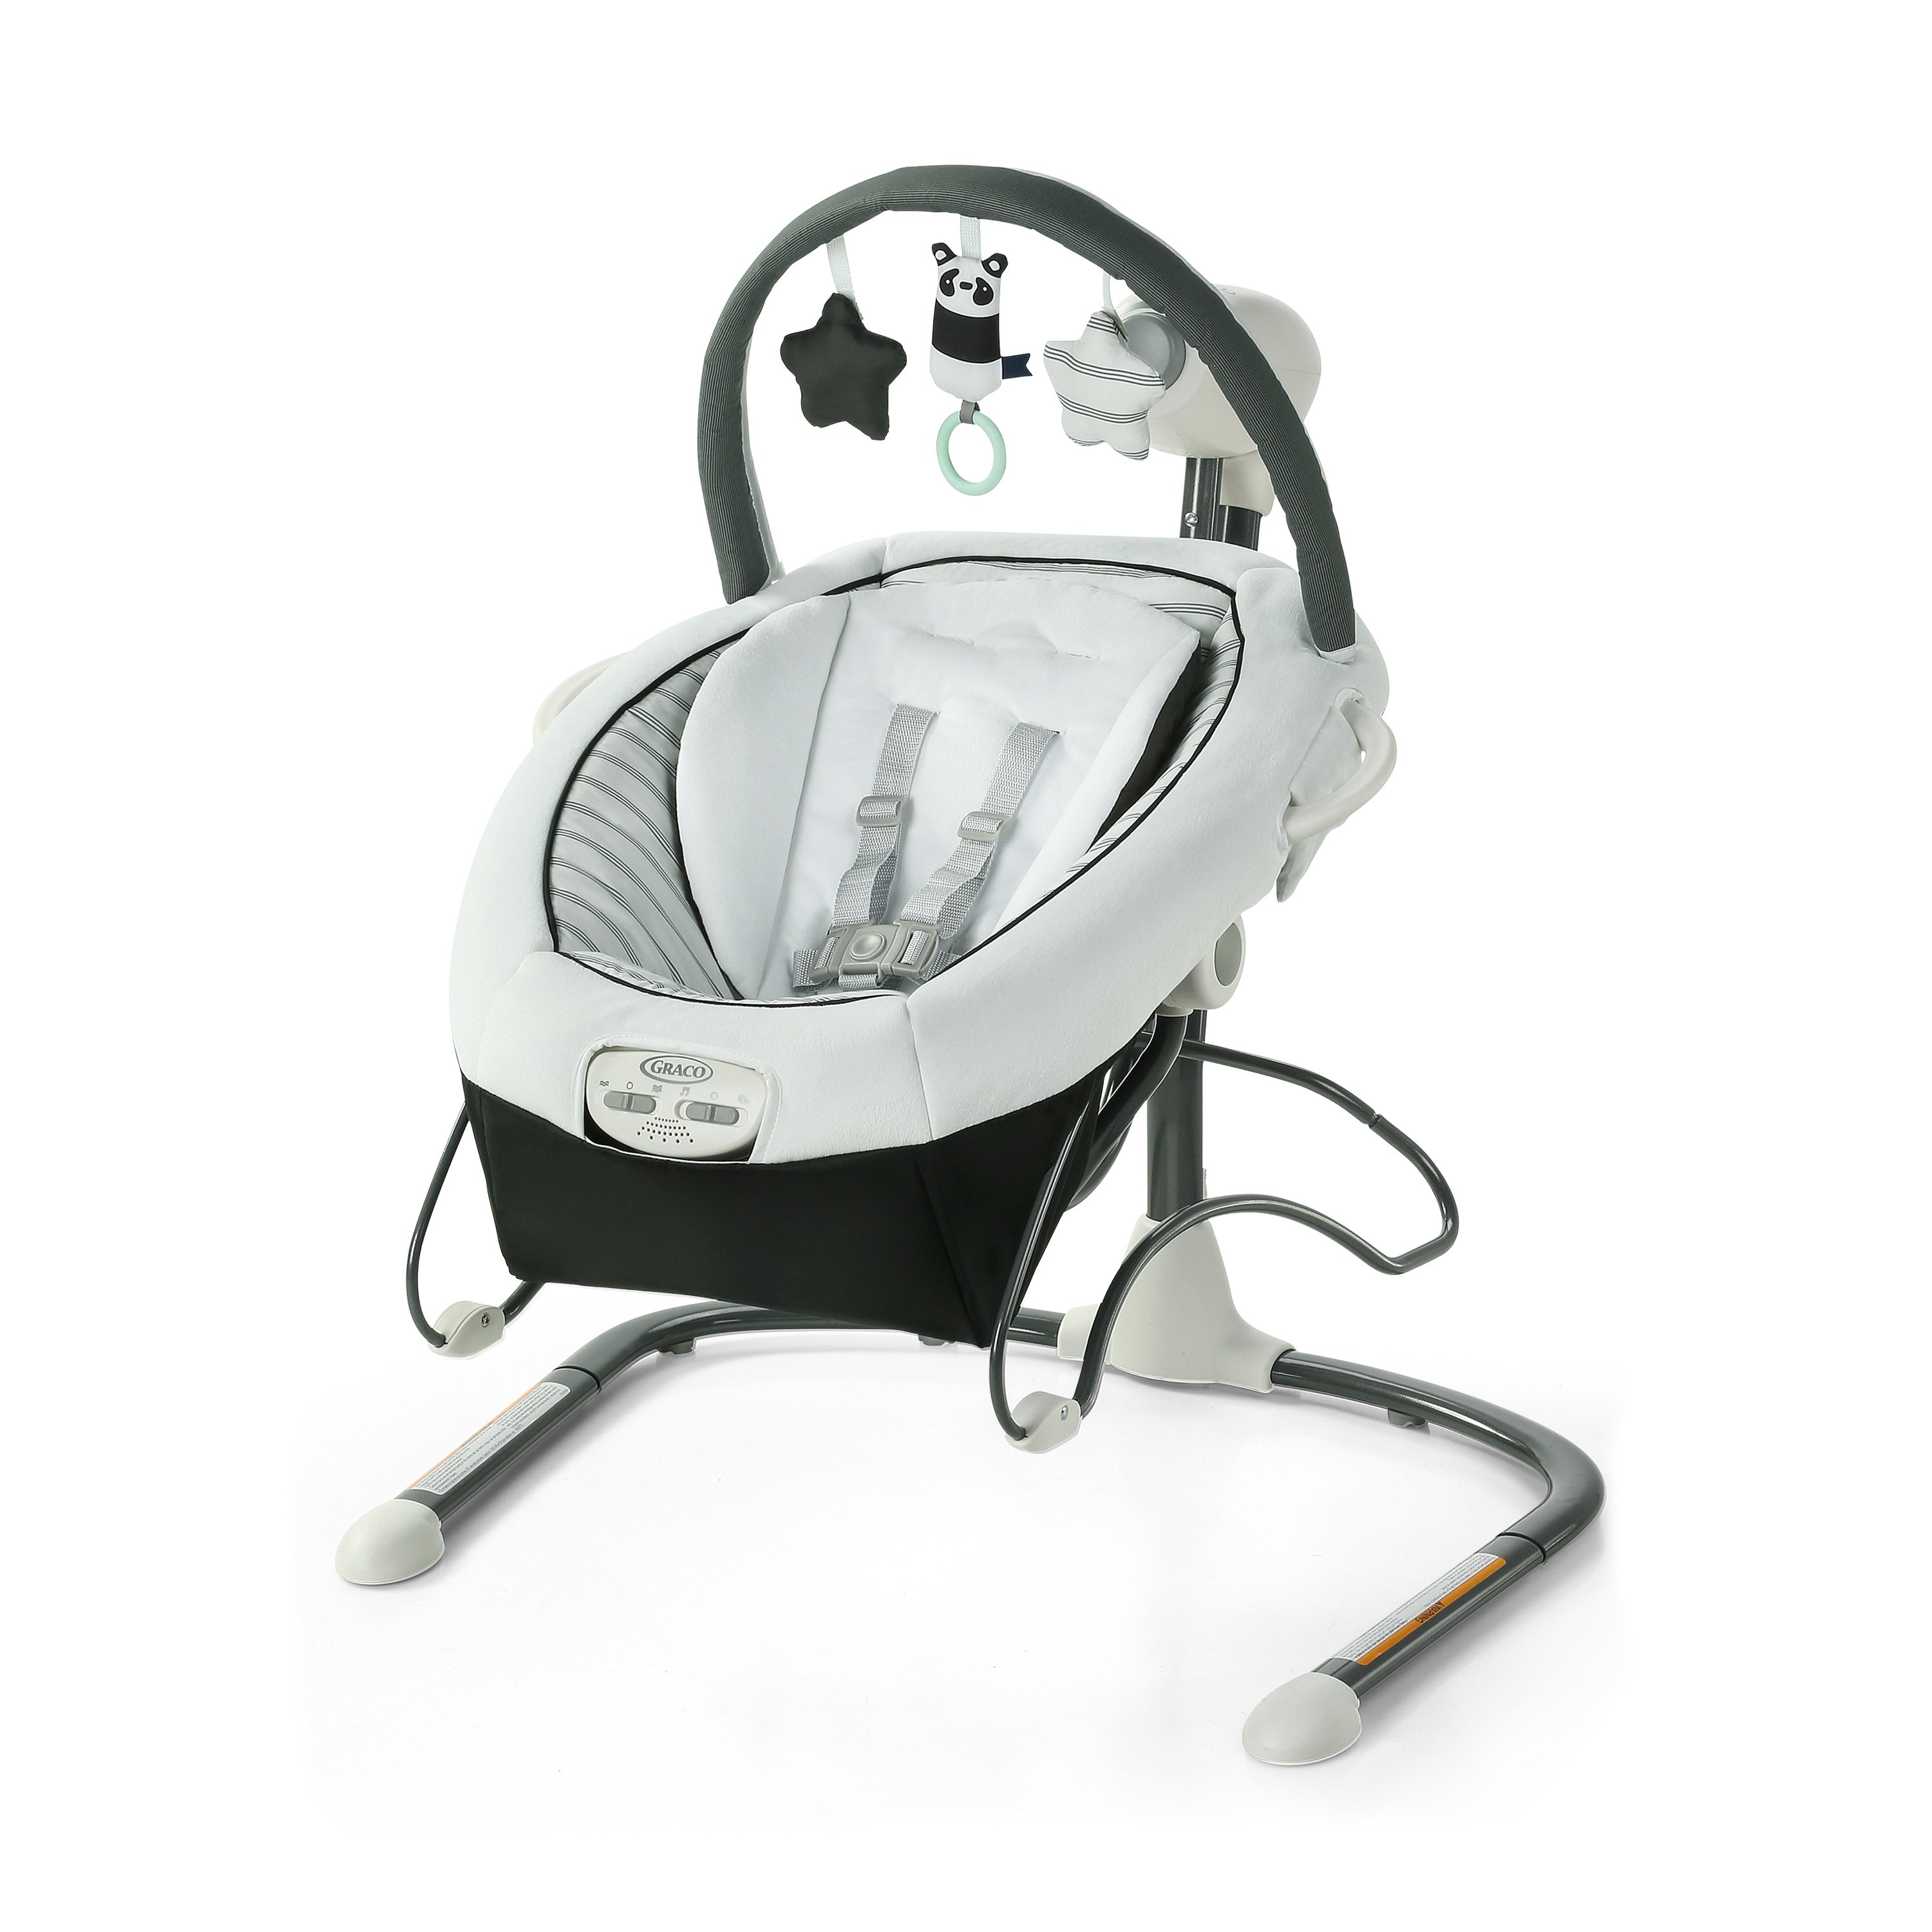 Alden Graco Duet Sway LX Swing with Portable Bouncer 